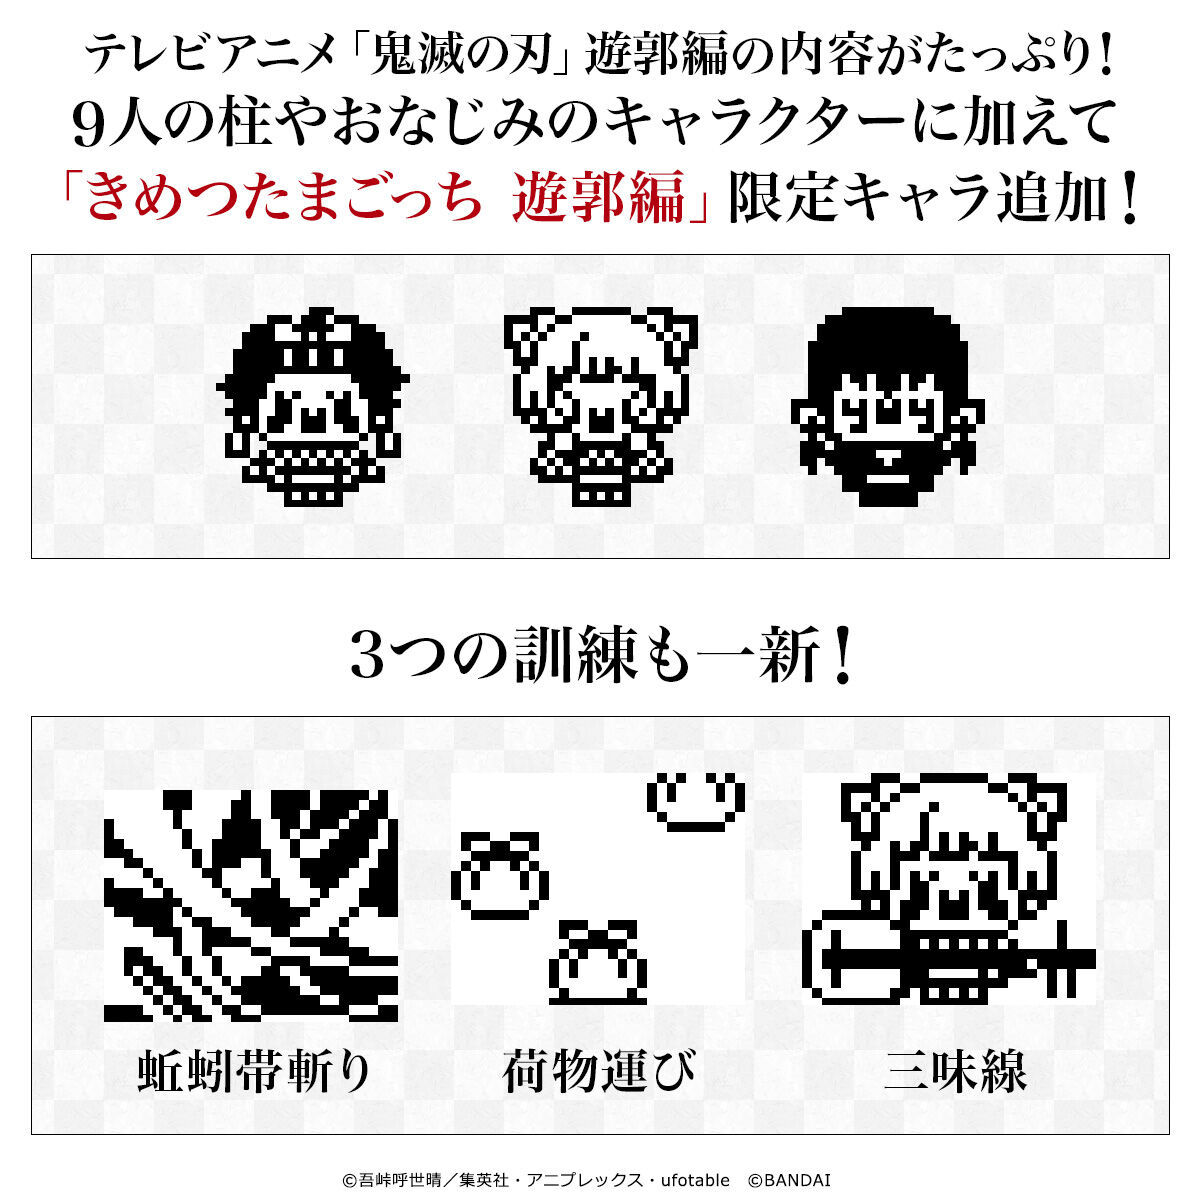 Demon Slayer Tamagotchi on sale now, preorders for 9 more types on the way